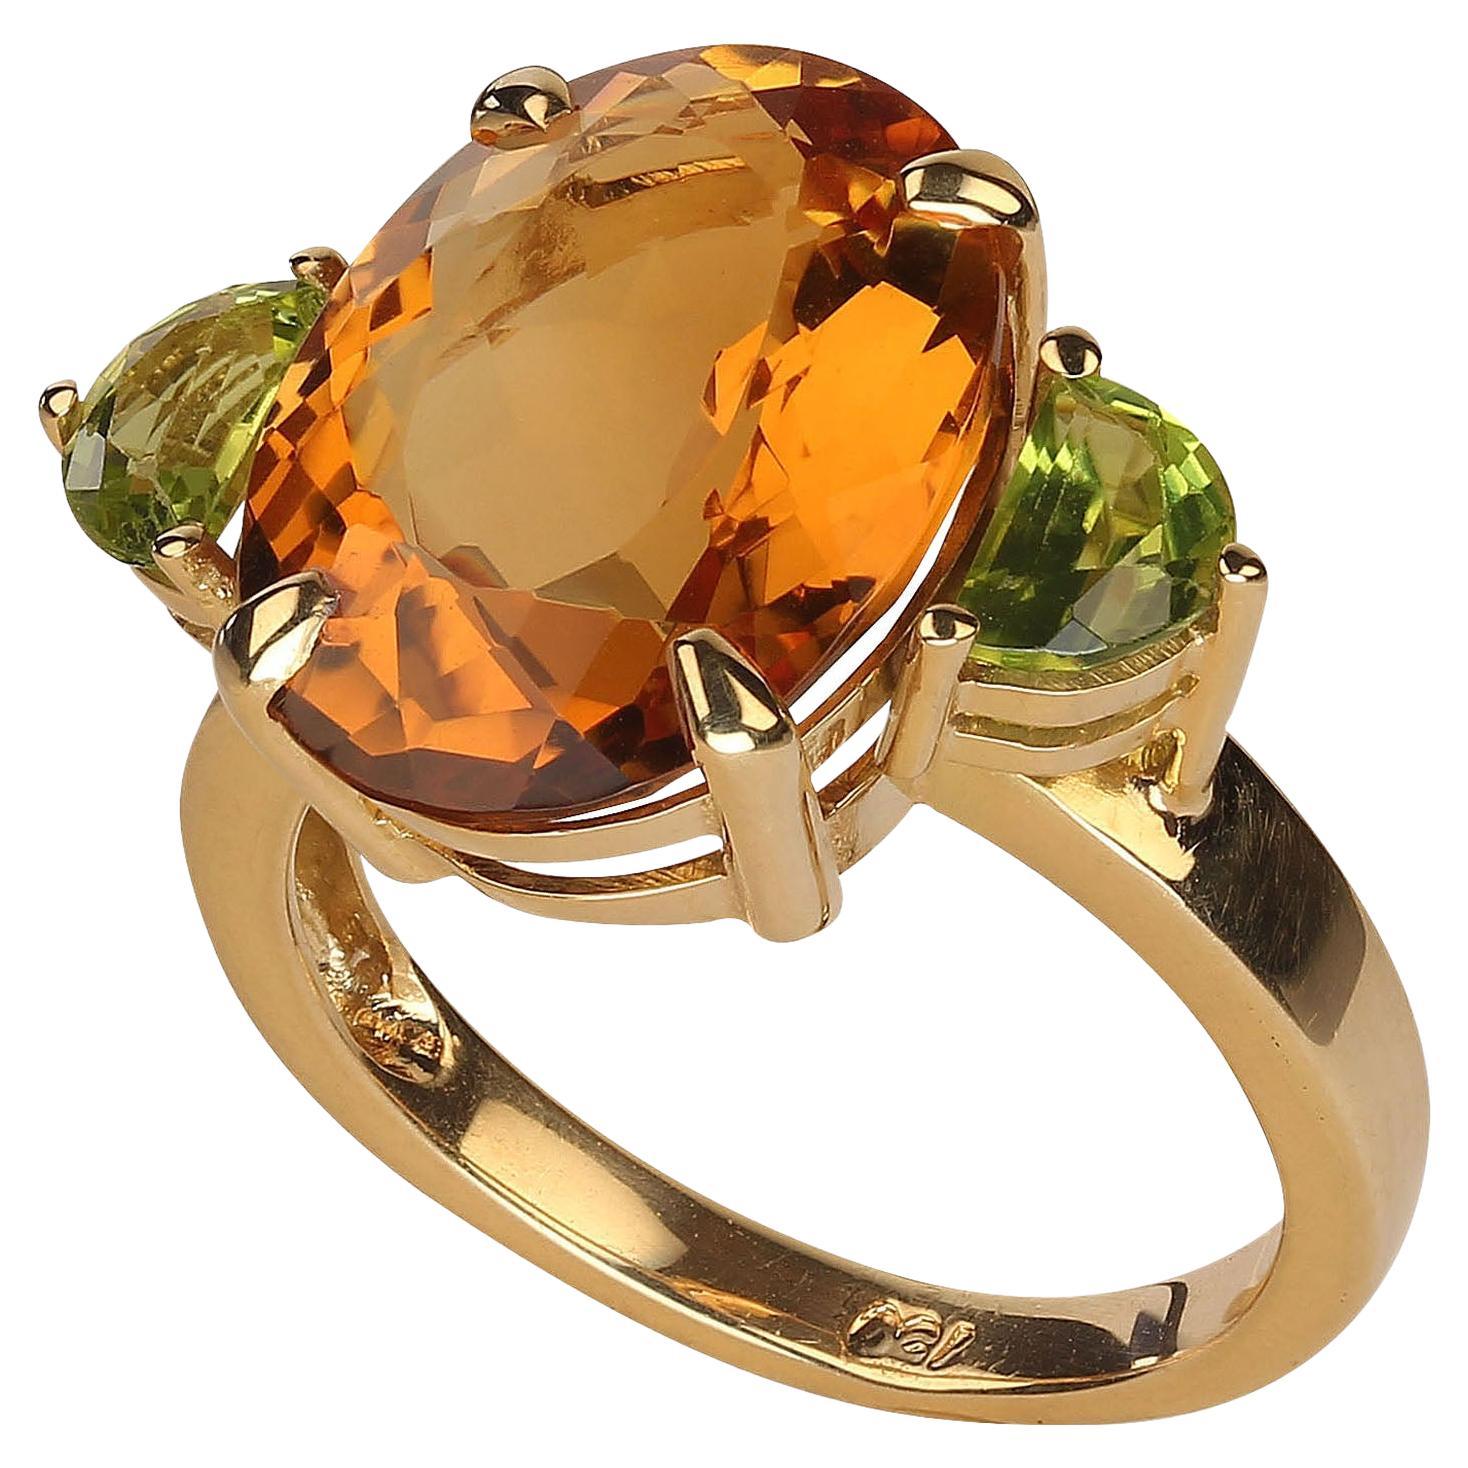 Unique 18K yellow gold ring featuring a gorgeous oval Citrine accented with half moon Peridot on each side.  This one of a kind Brazilian handmade ring is a show stopper.  The 8.54 carat oval Citrine has an aura of golden radiance. Add the sparkling